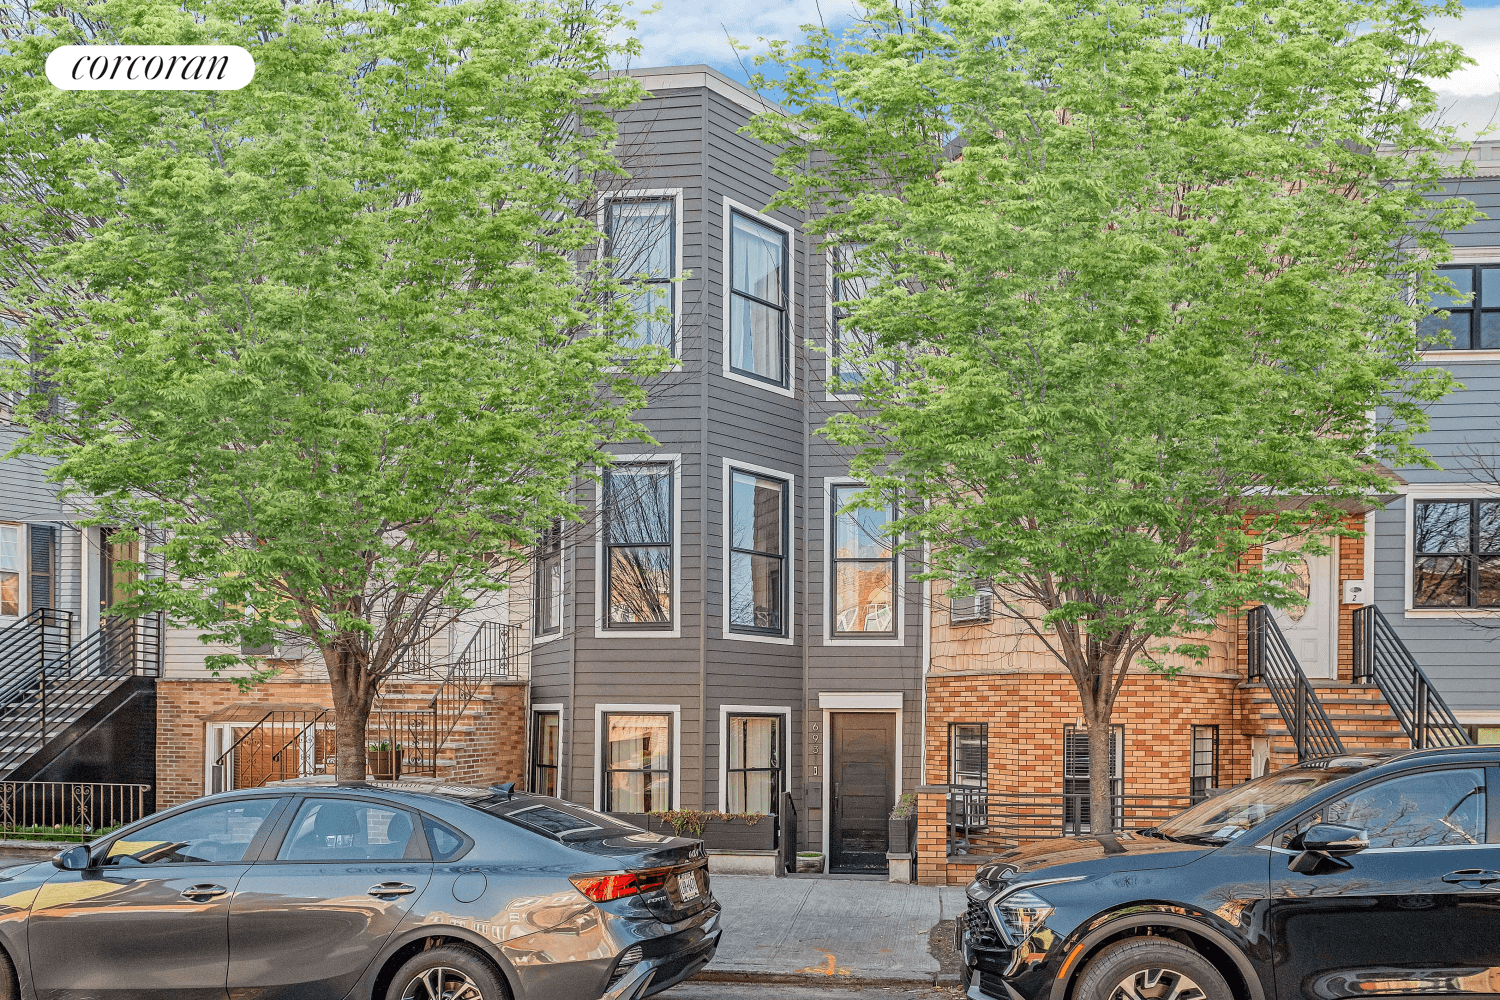 Introducing 693 Humboldt Street, a modern three story townhome nestled in the heart of Greenpoint, Brooklyn.